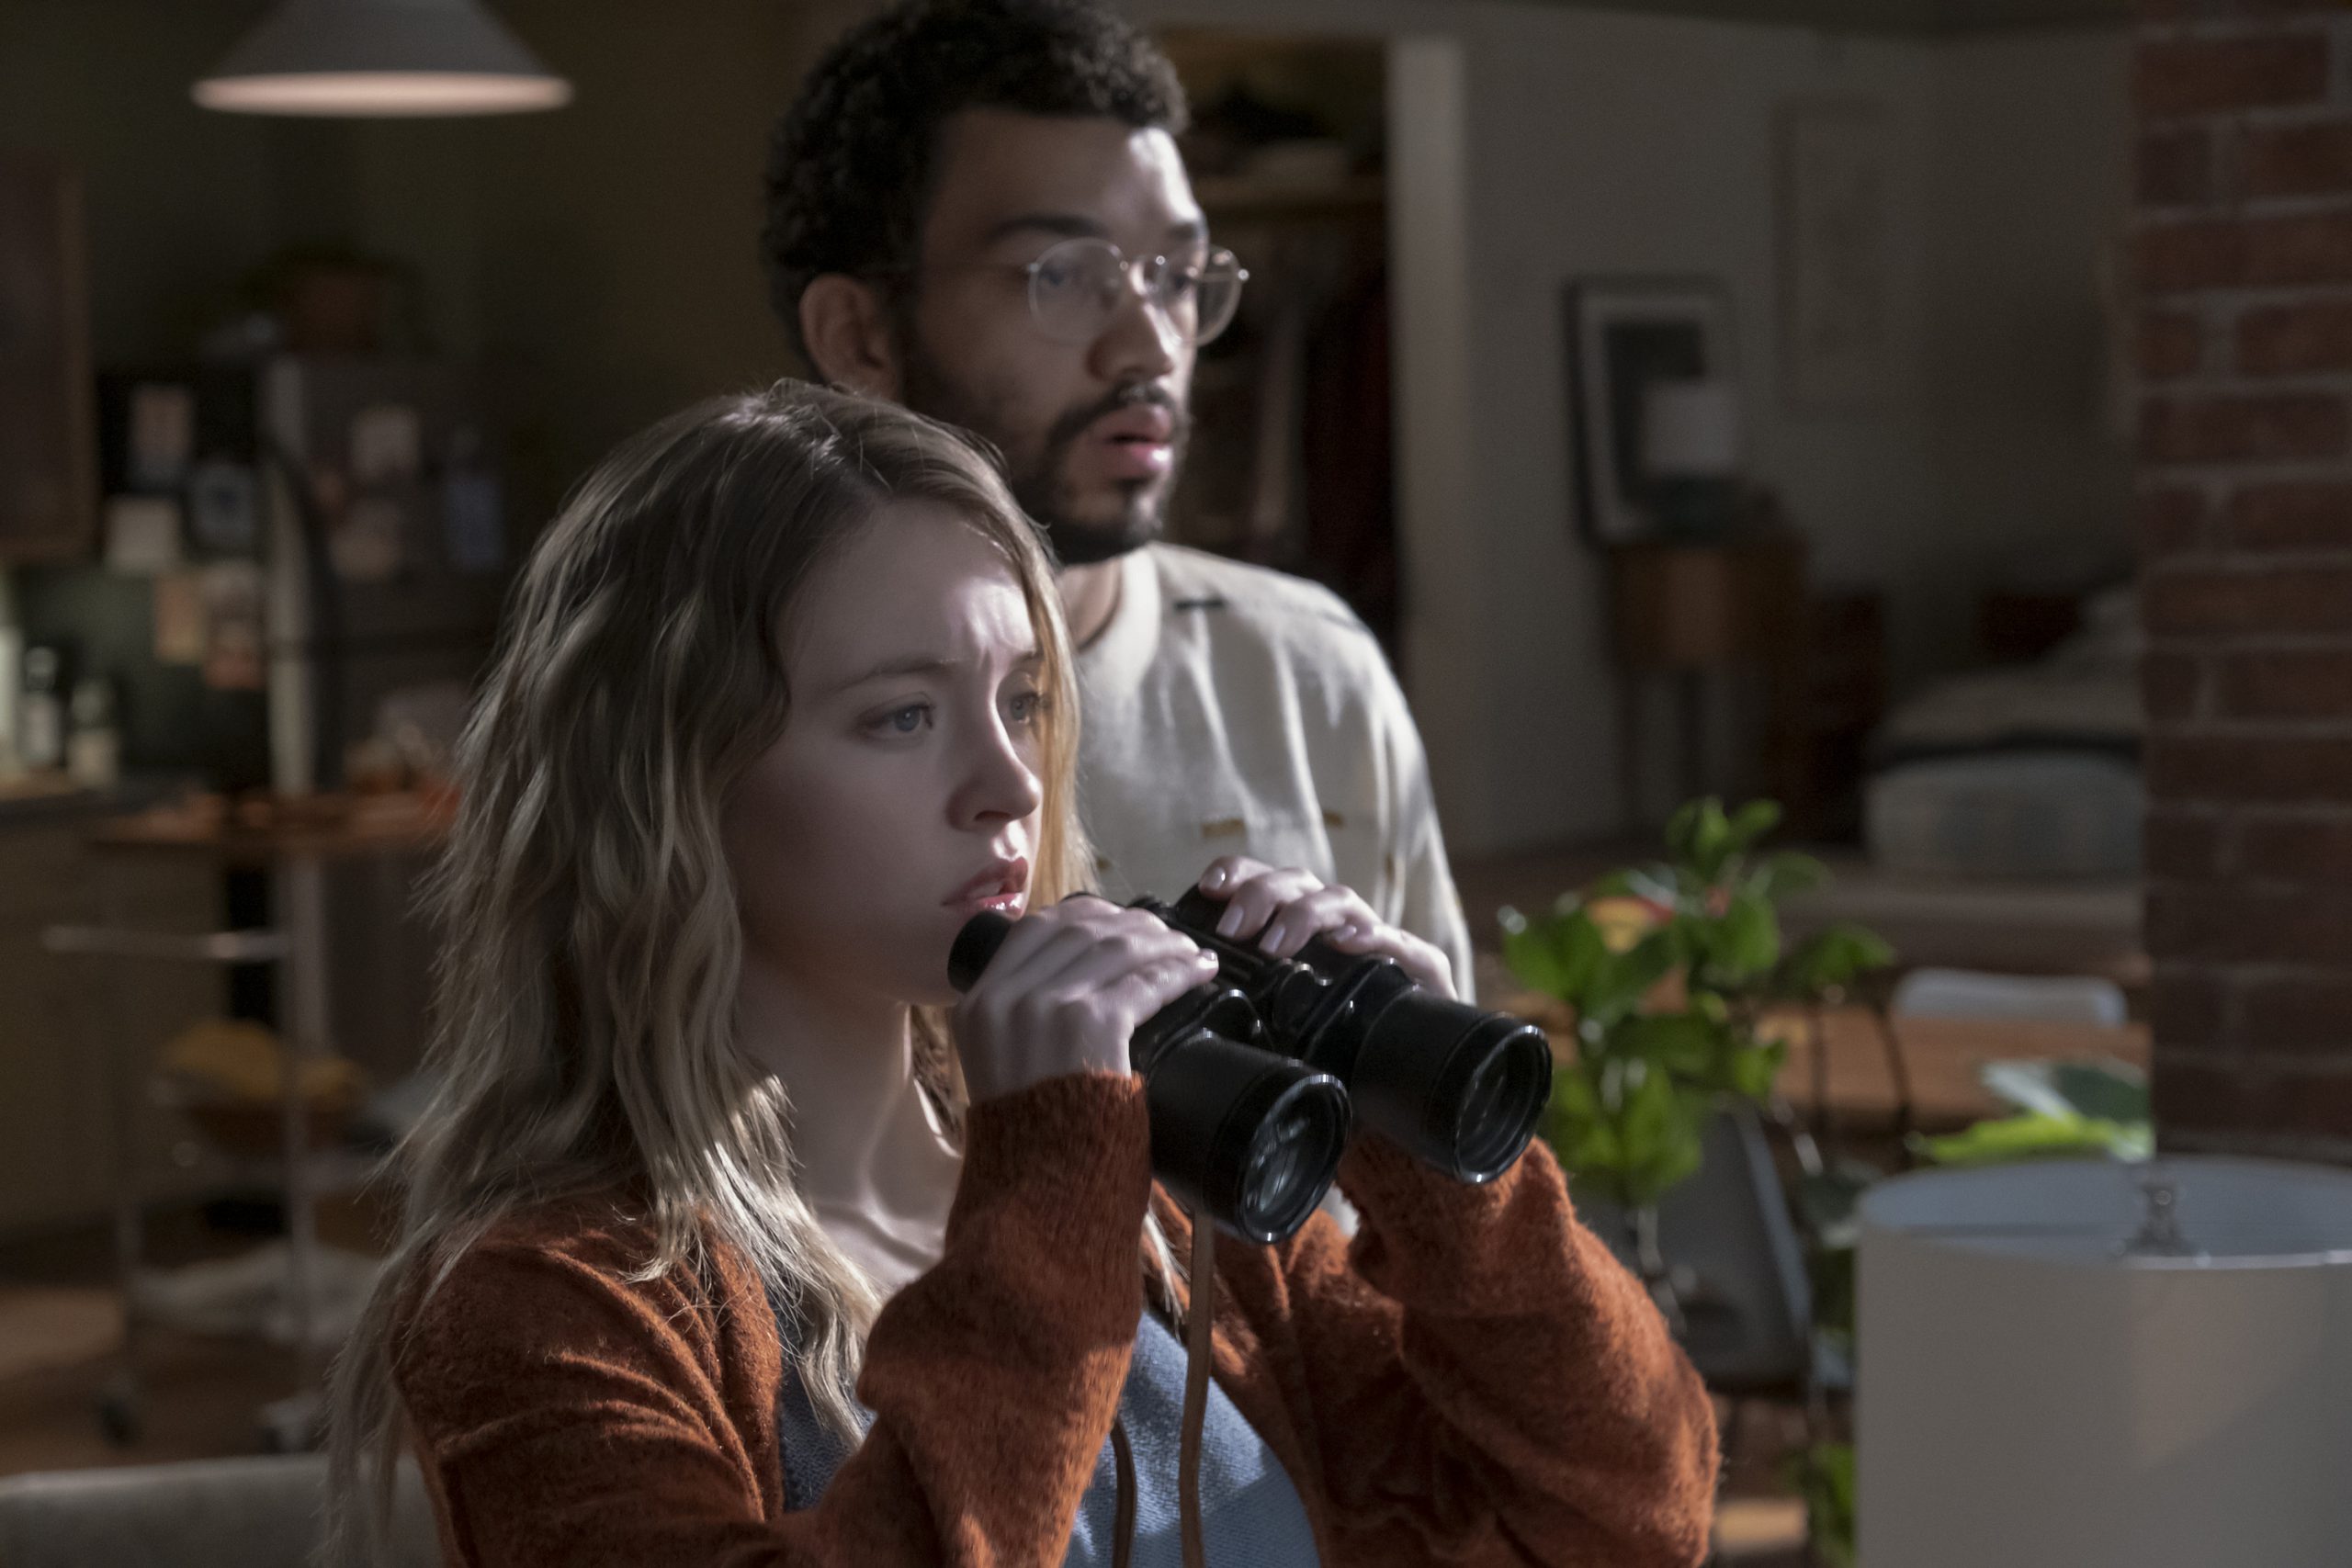 Sydney Sweeney and Justice Smith star in The Voyeurs